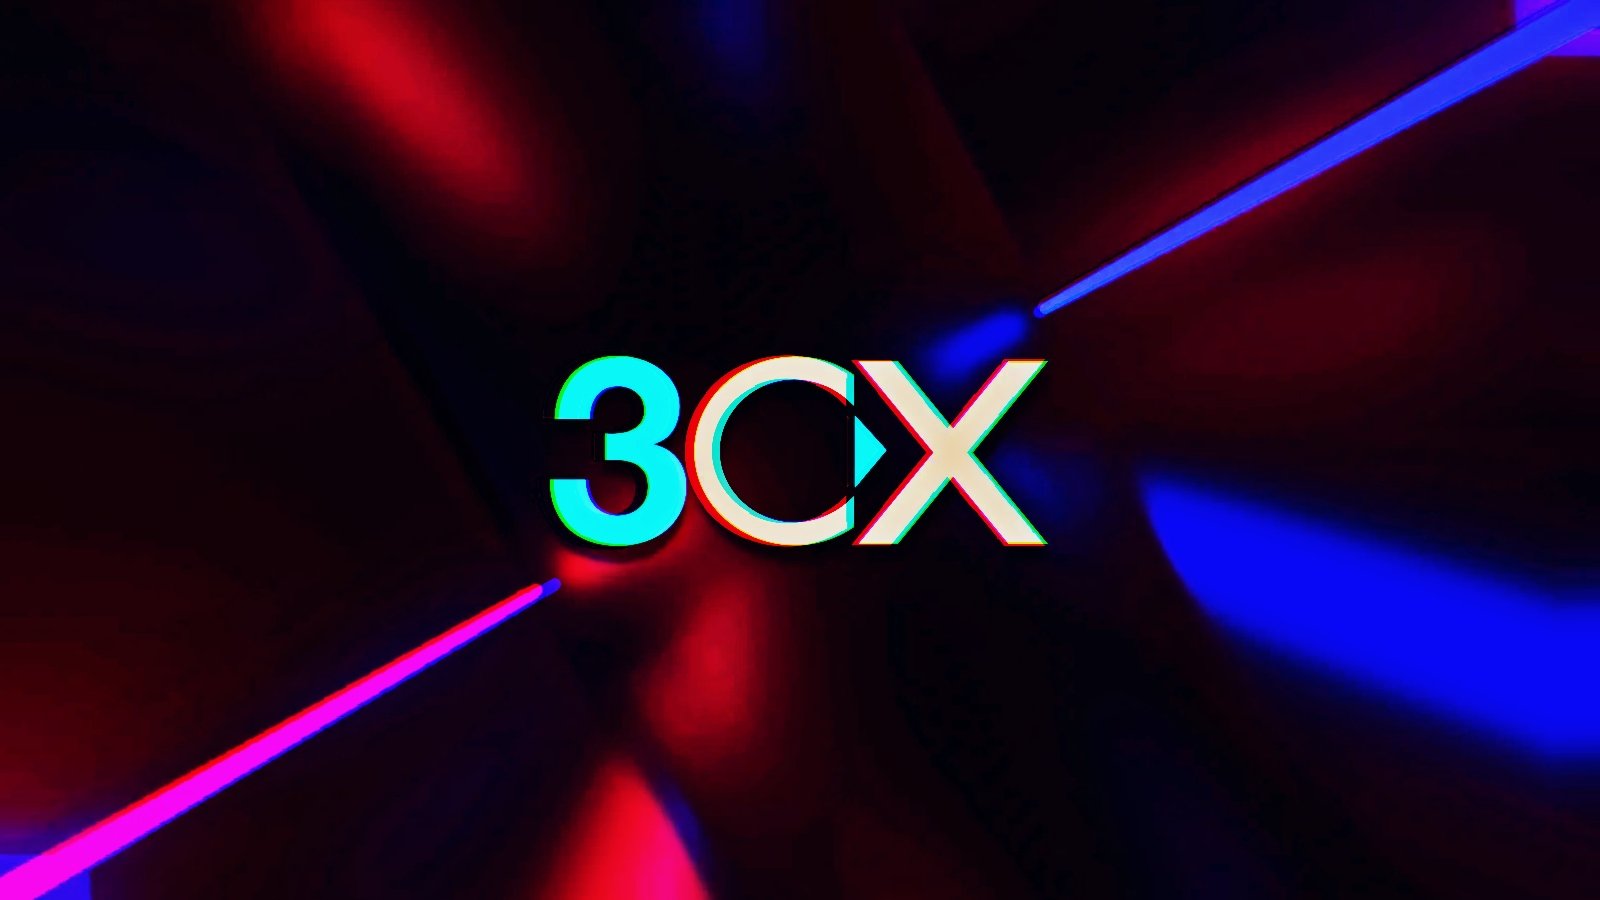 3CX warns customers to disable SQL database integrations